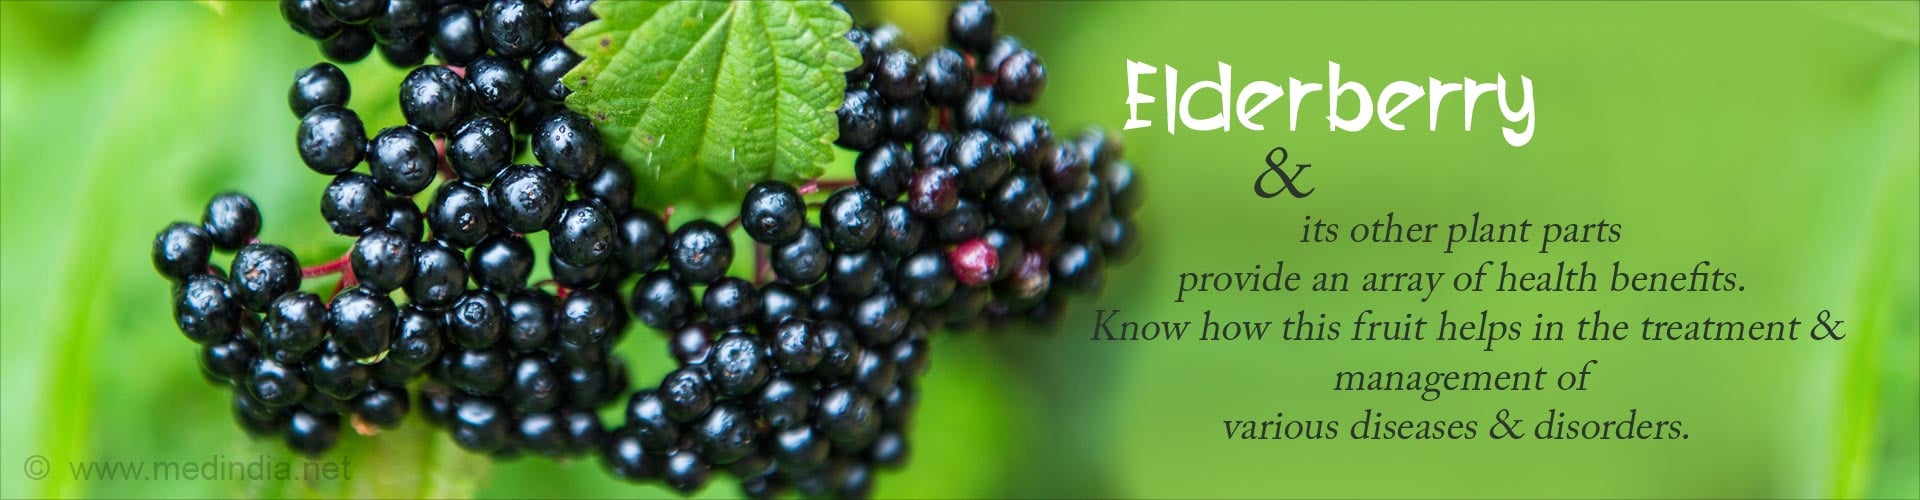 Elderberry and its other plant parts provide an array of health benefits. Know how this fruit helps in the treatment and management of various diseases and disorders